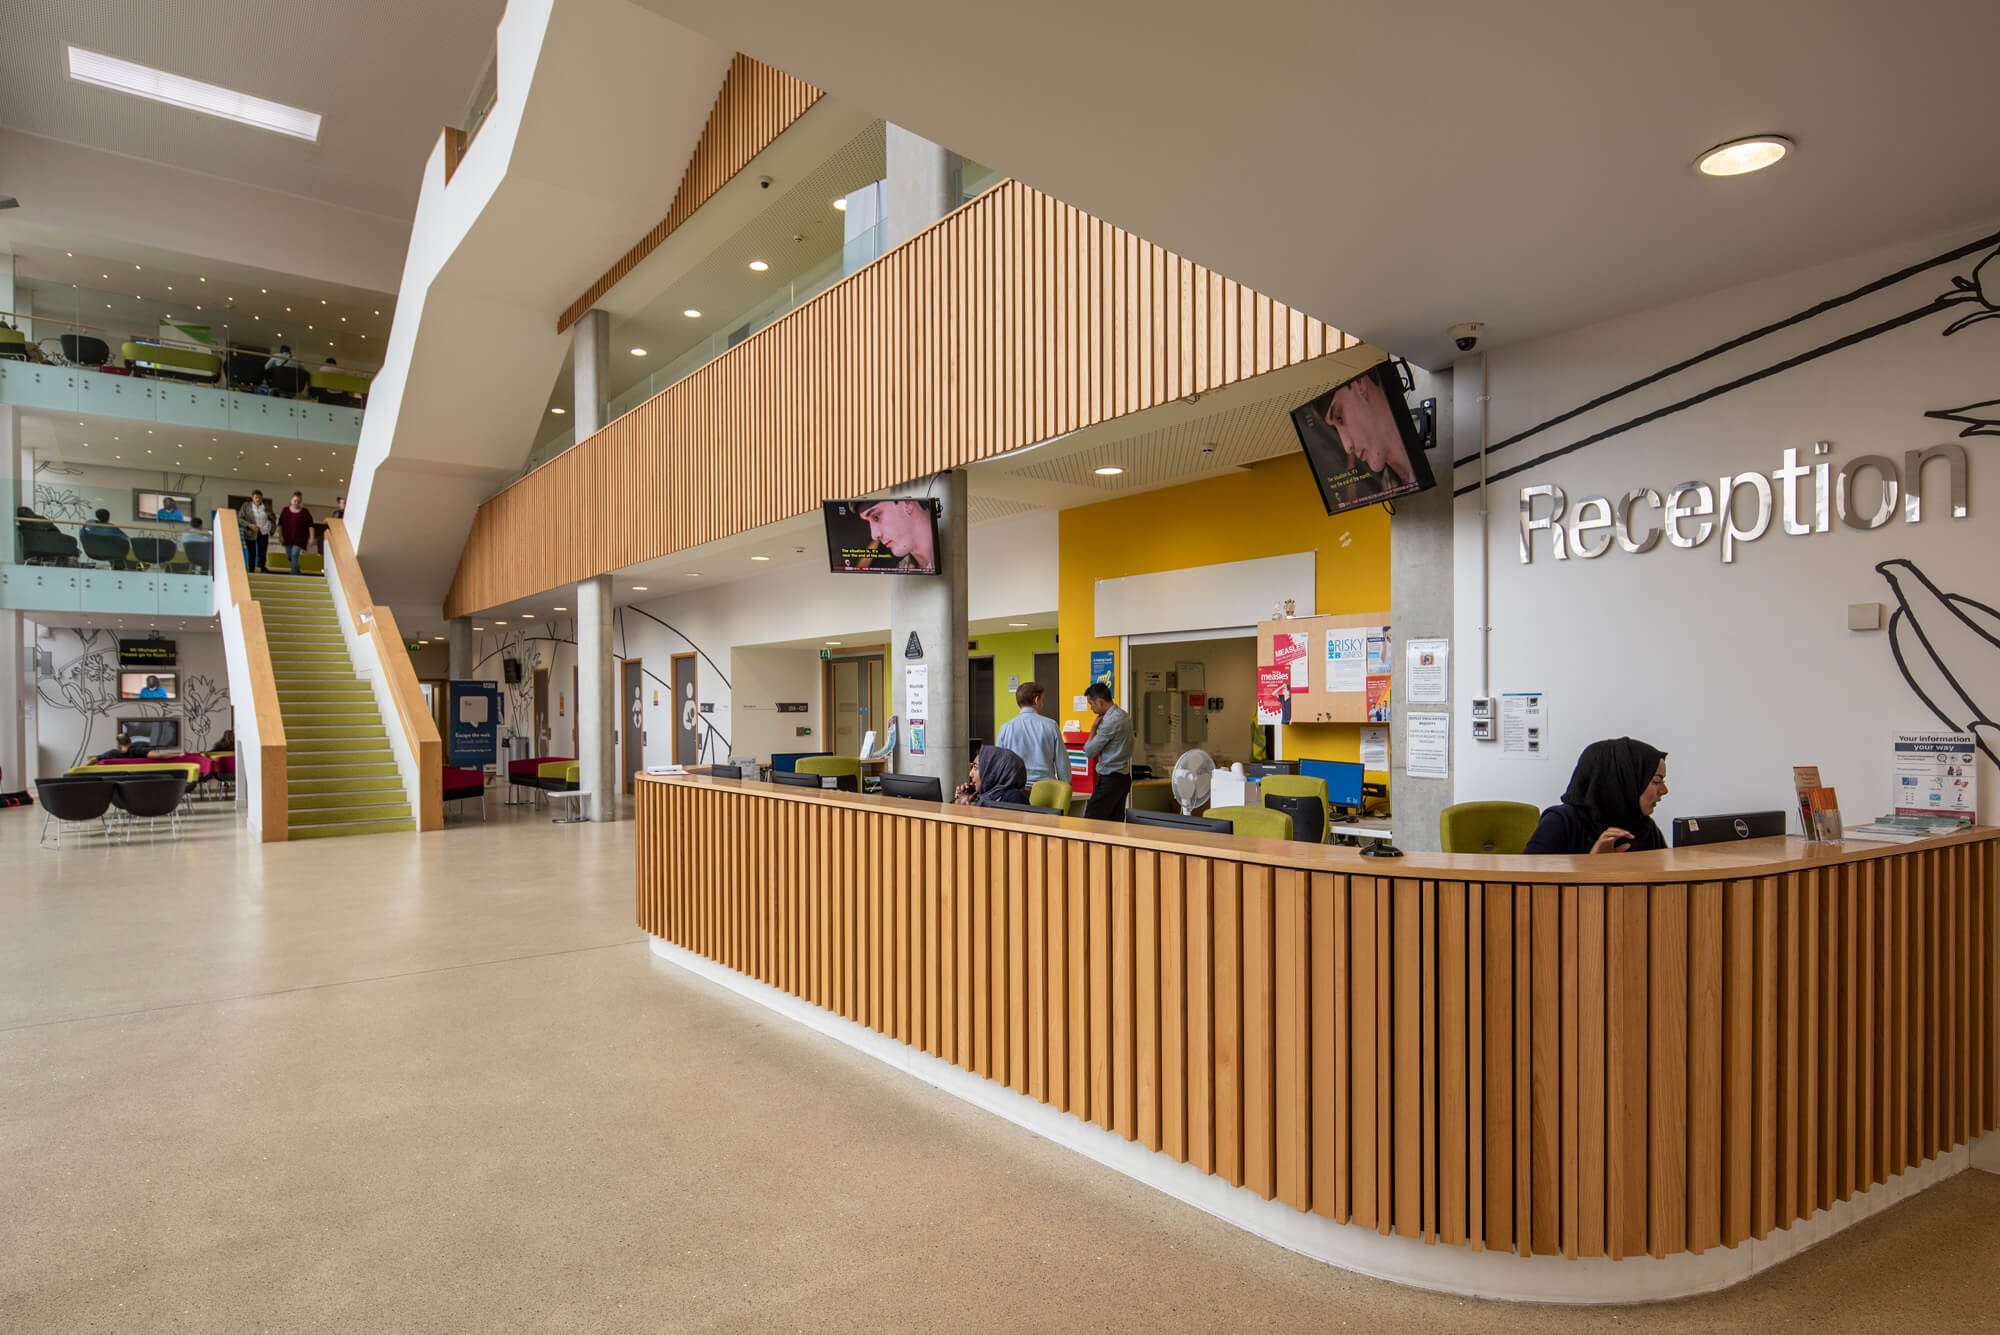 Reception area at a NHS site. The countertop is curved and has wooden panels. There's a 'Reception' sign above the space with the countertop and desks